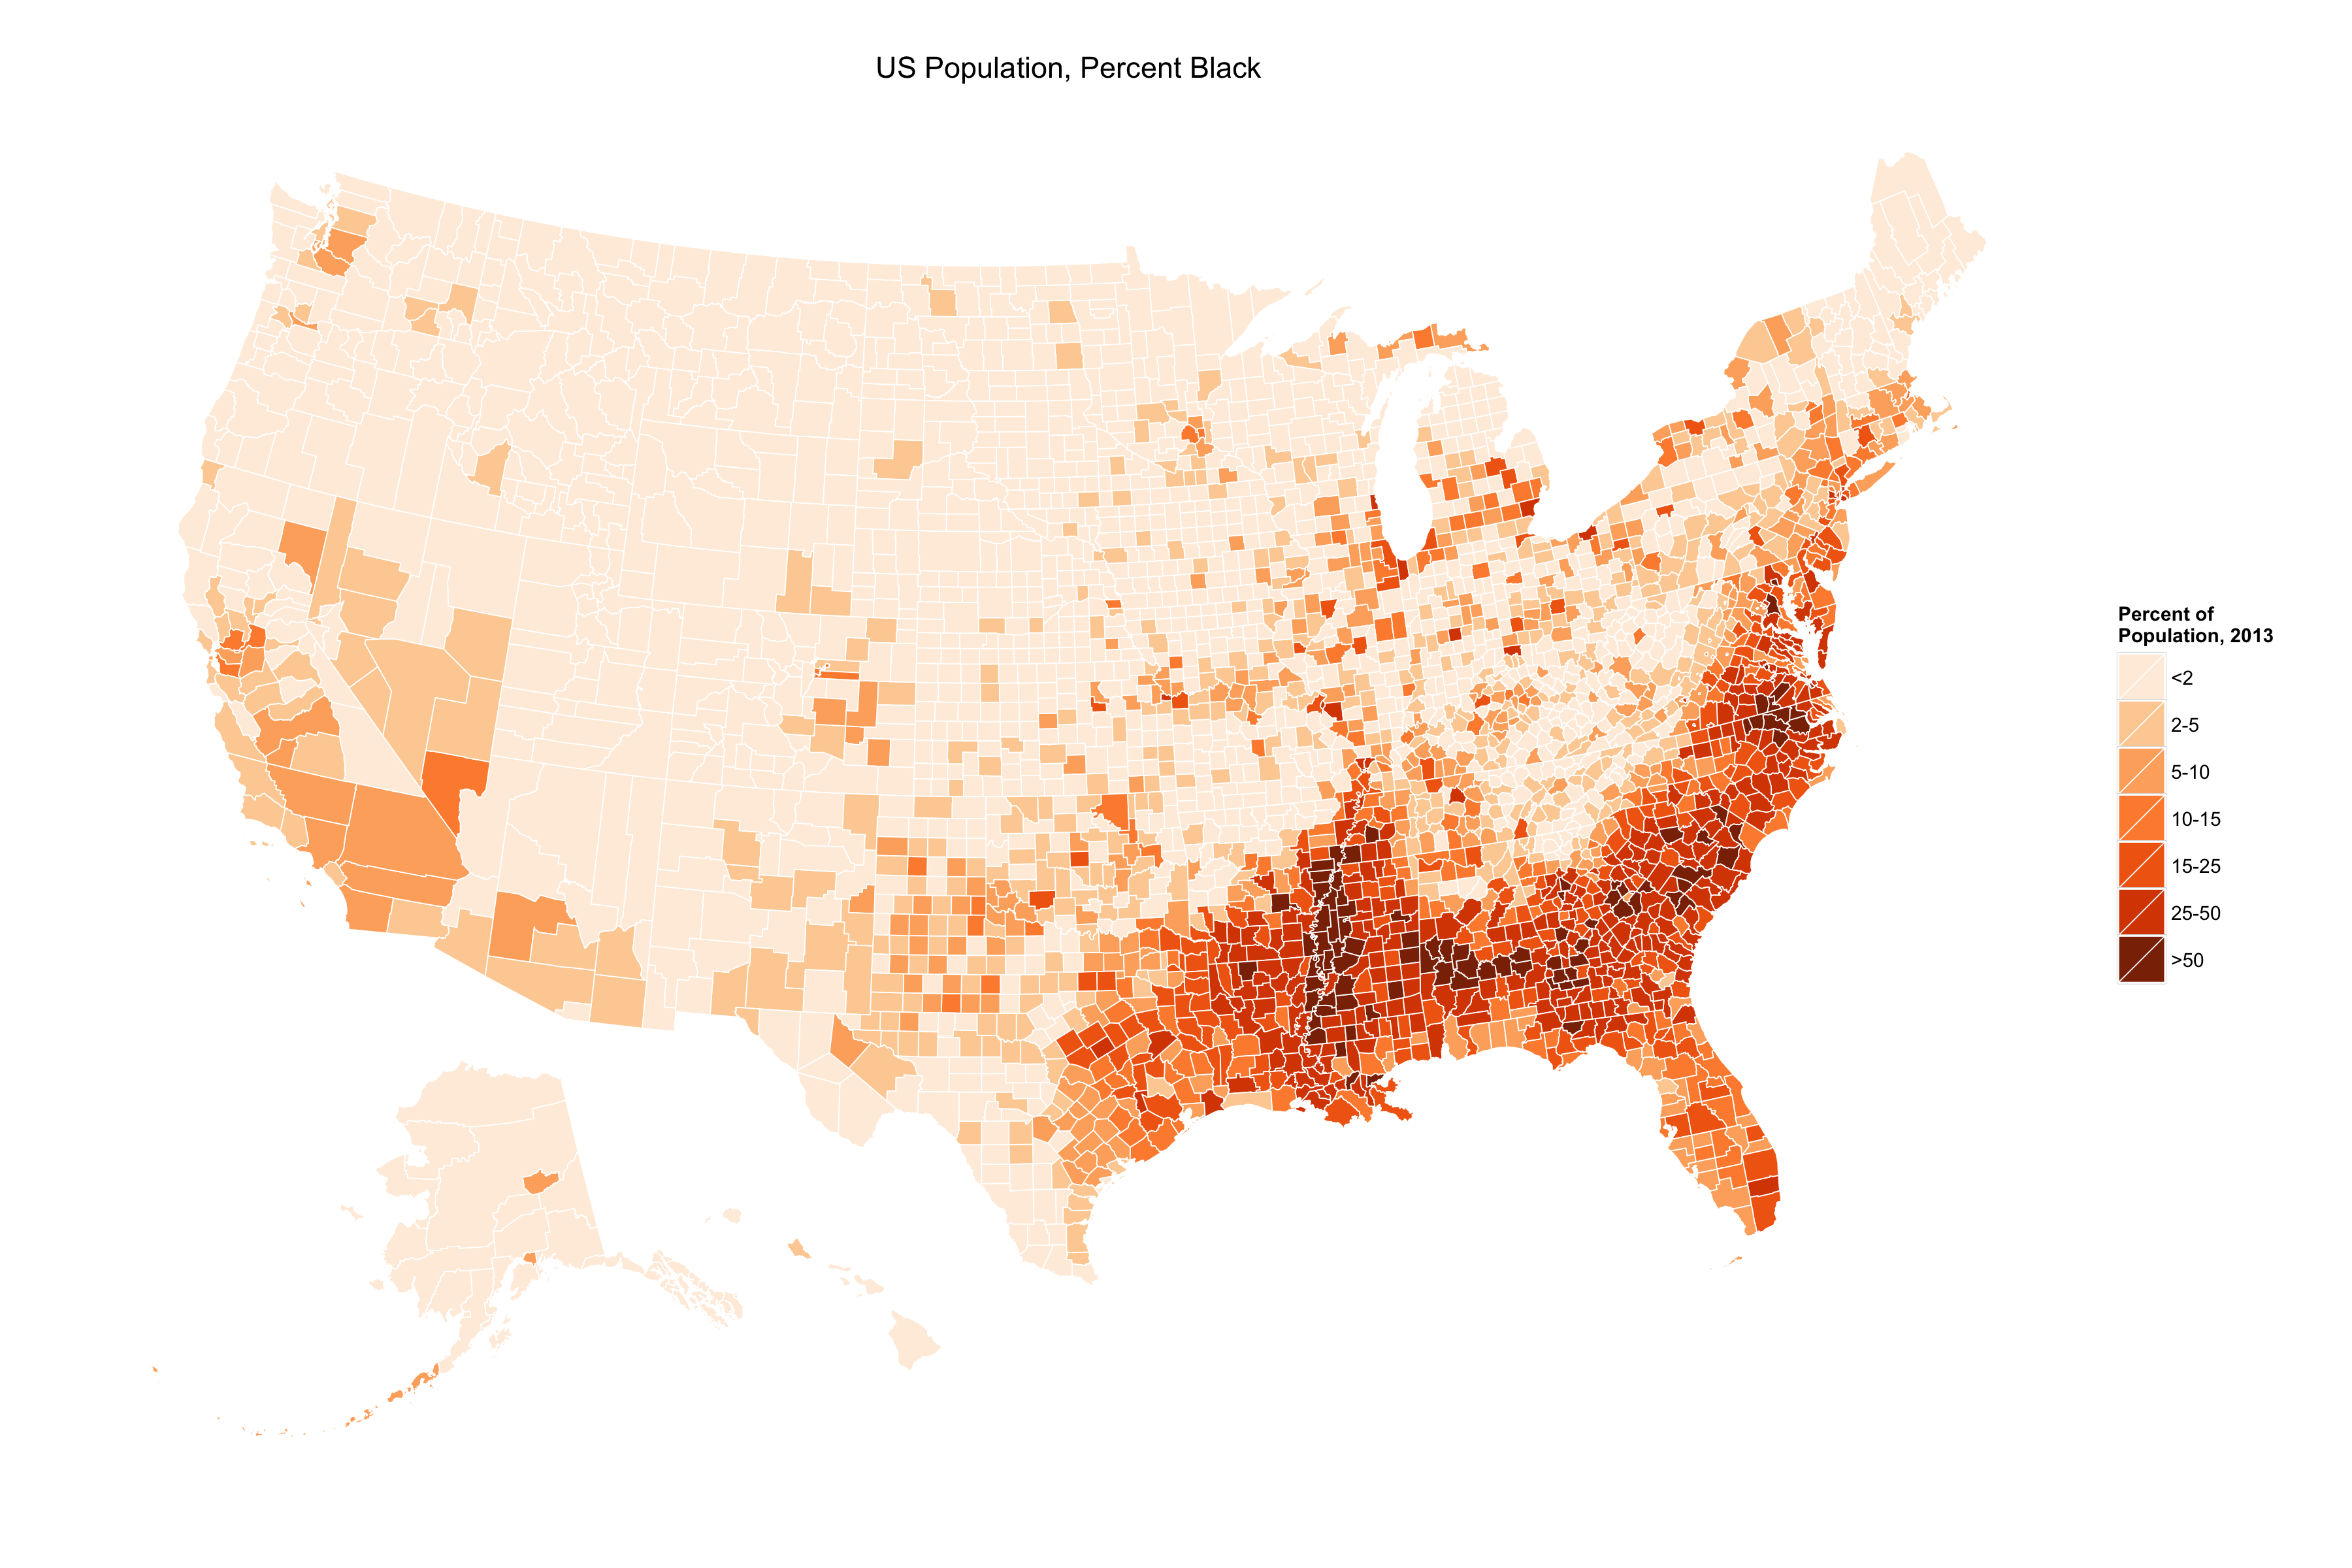 Percent Black Population, by county.